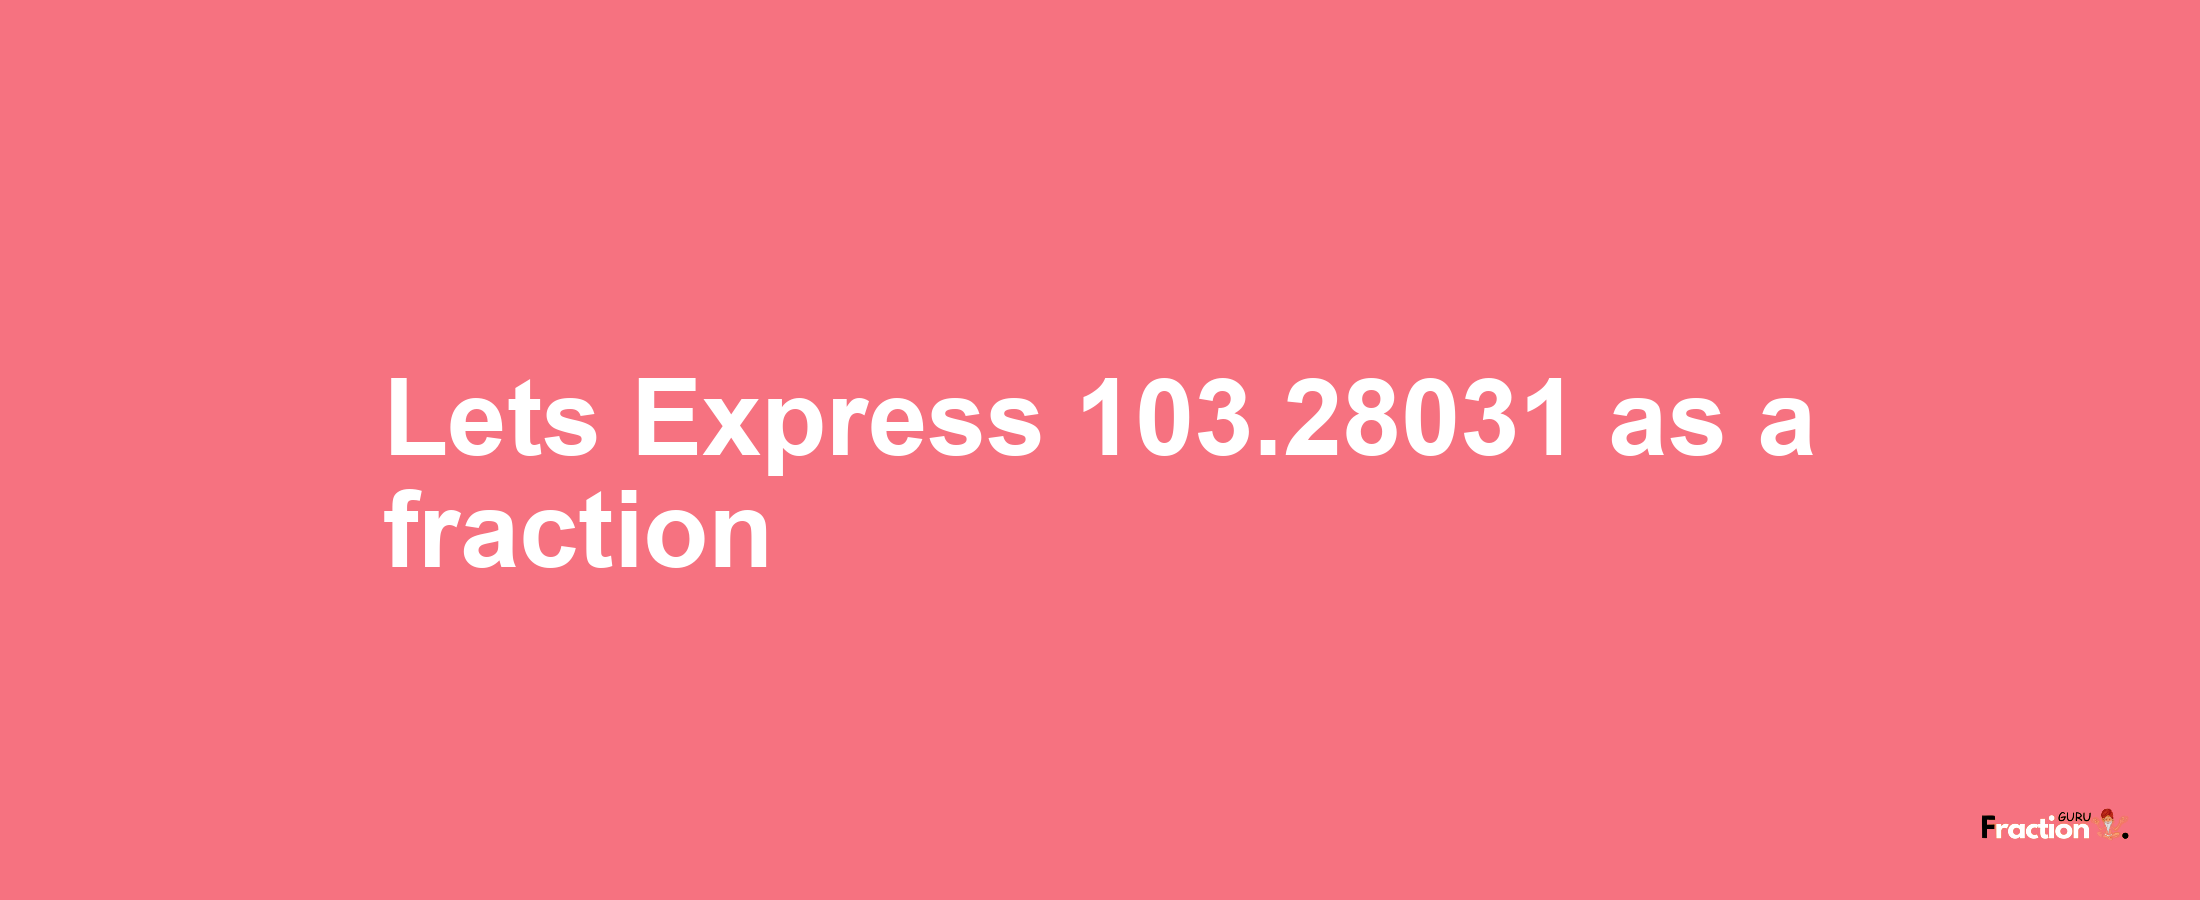 Lets Express 103.28031 as afraction